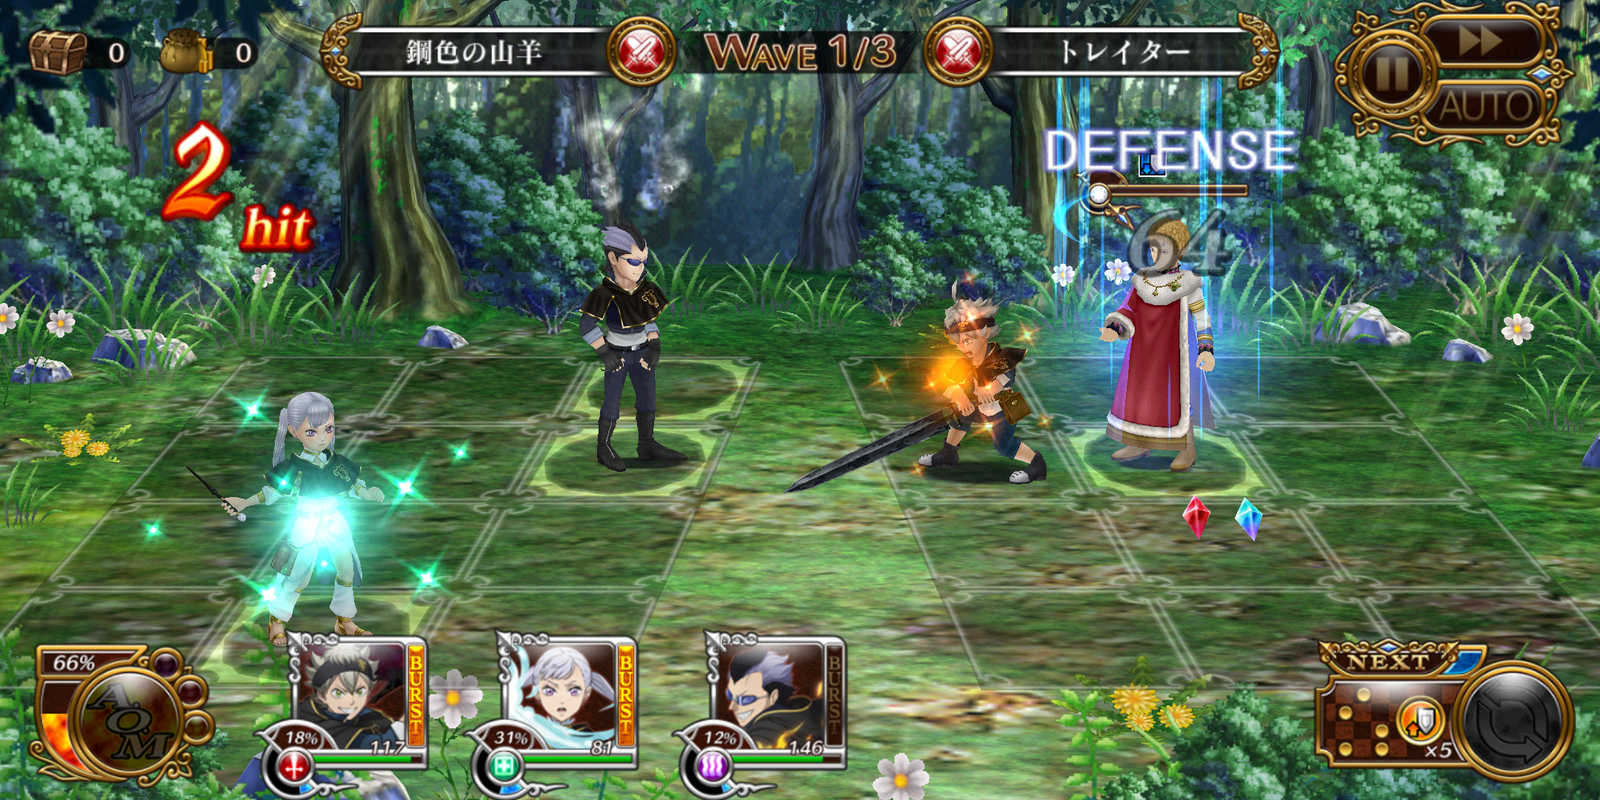 Black Clover: Infinite Knights (JP) 1.5.4 APK for Android Screenshot 8